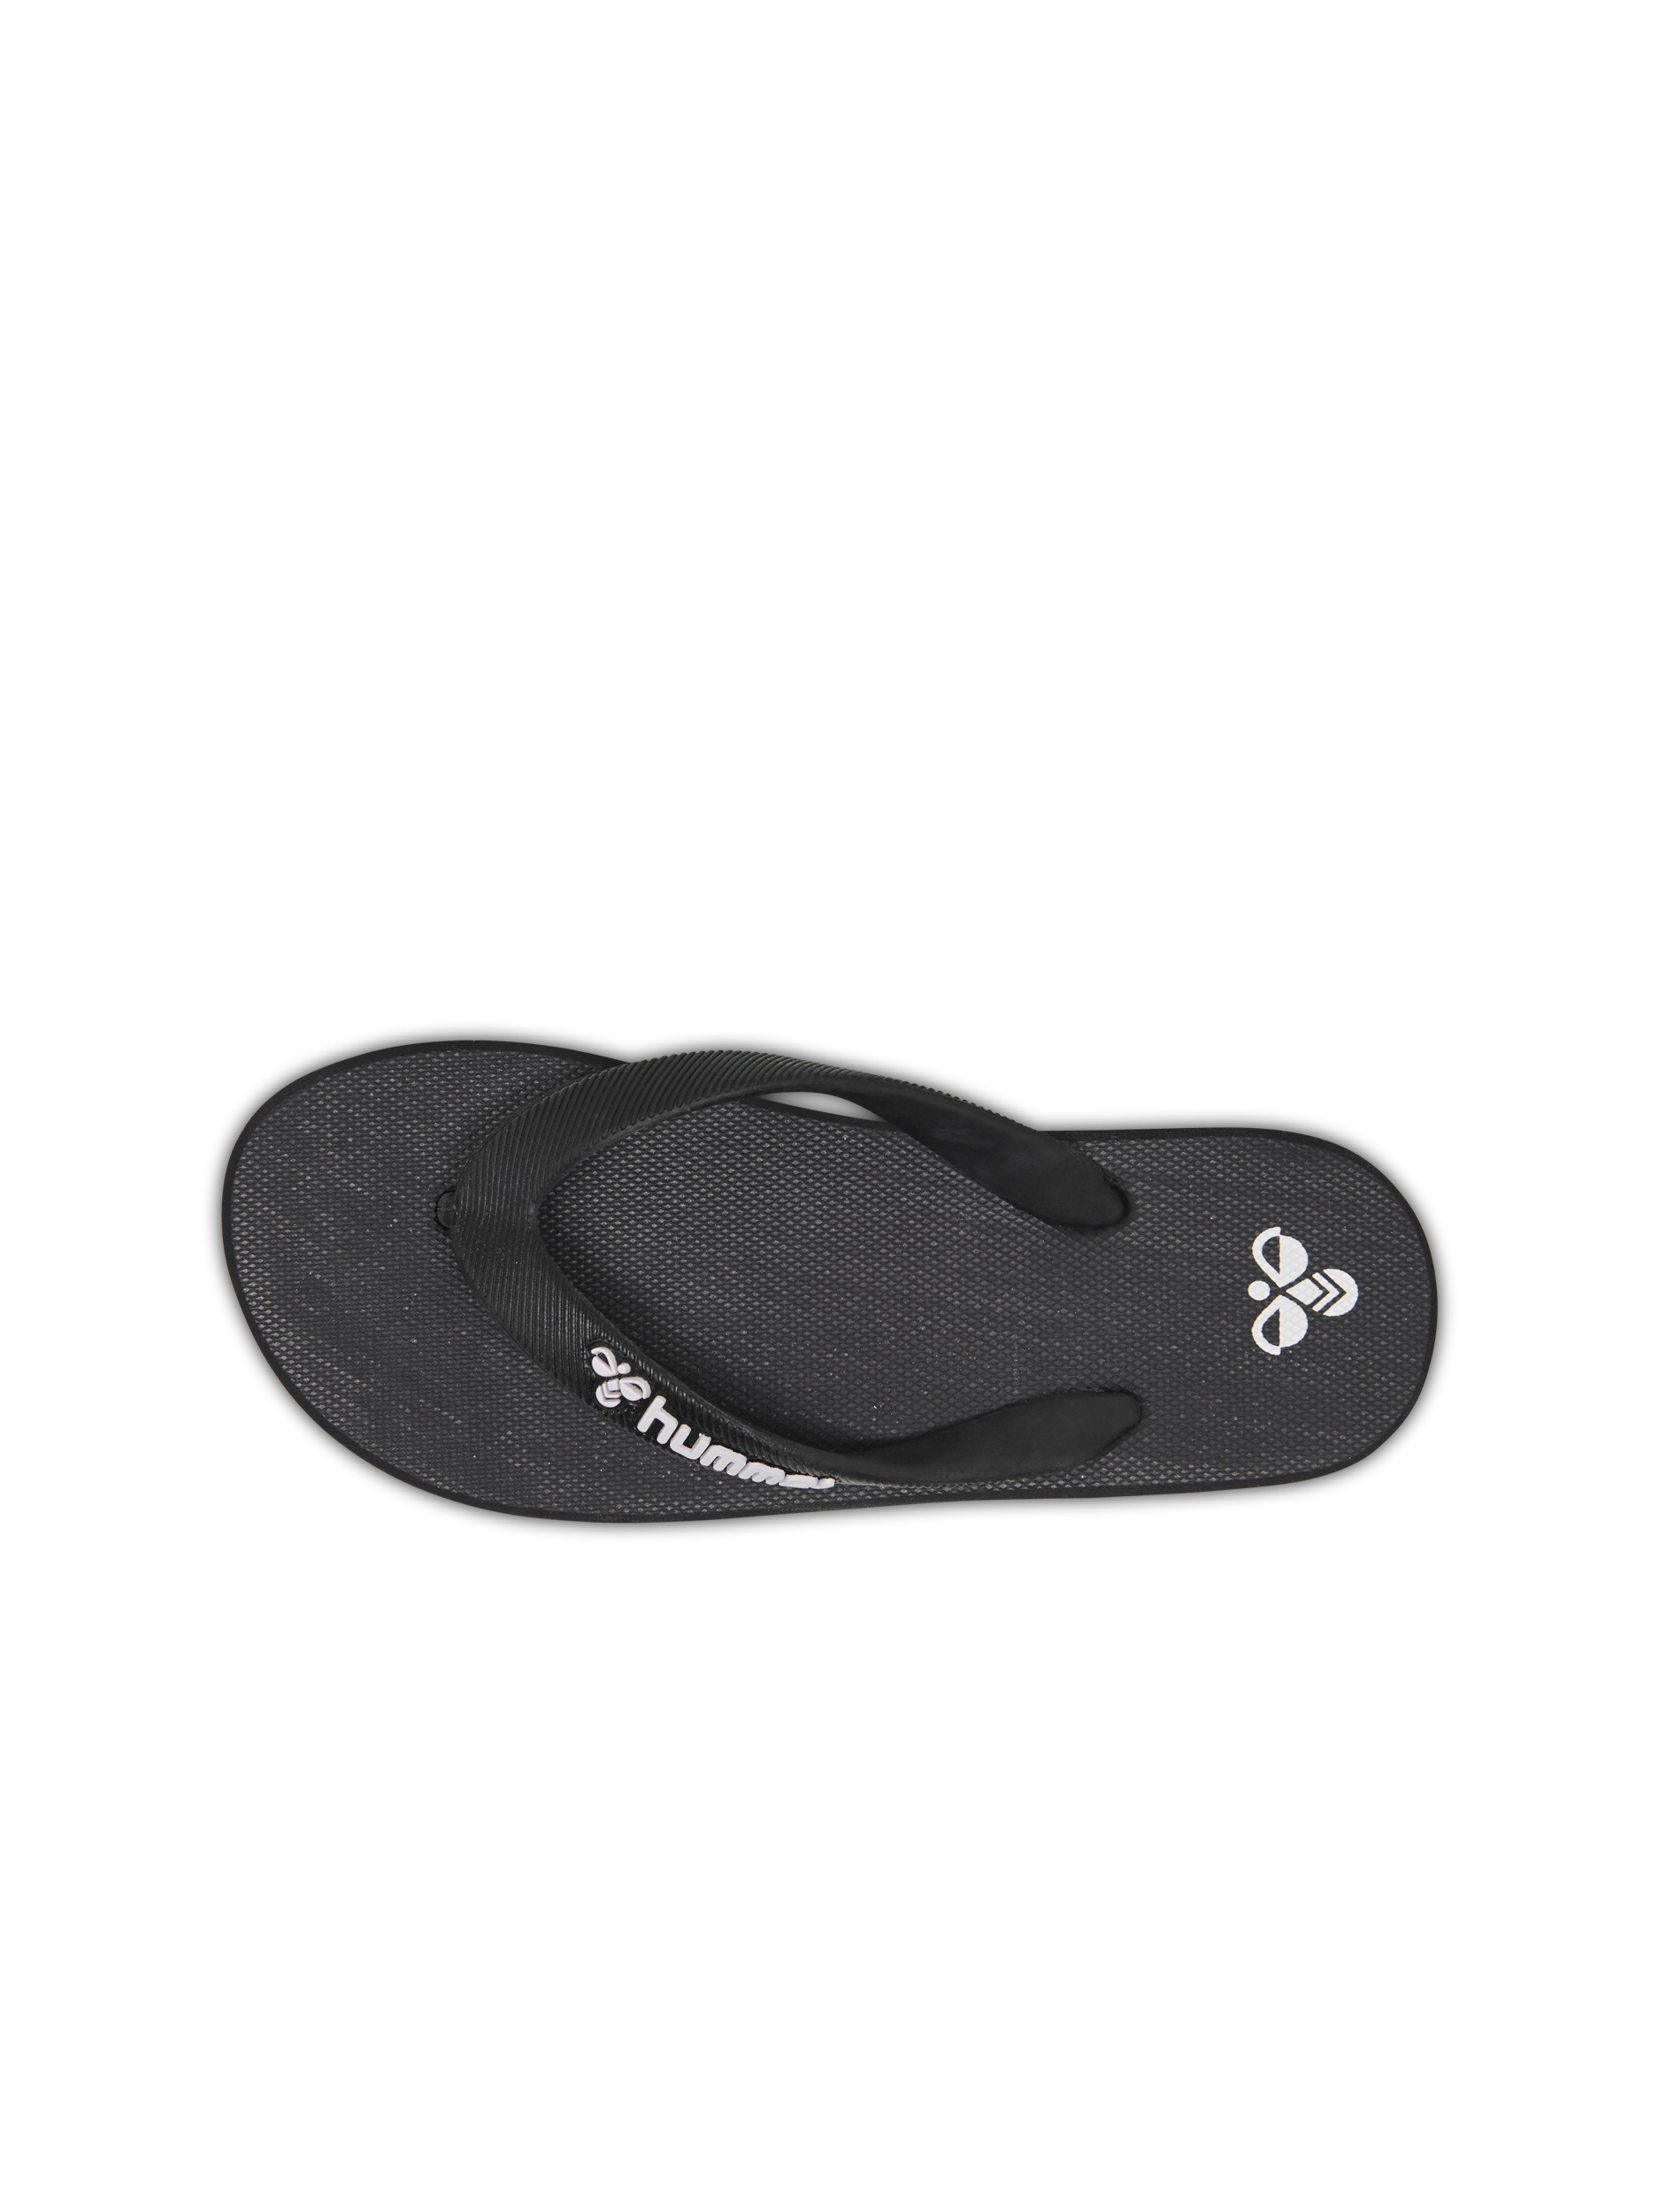 Oxer Black Daily Wear Slippers - Buy Oxer Black Daily Wear Slippers Online  at Best Prices in India on Snapdeal